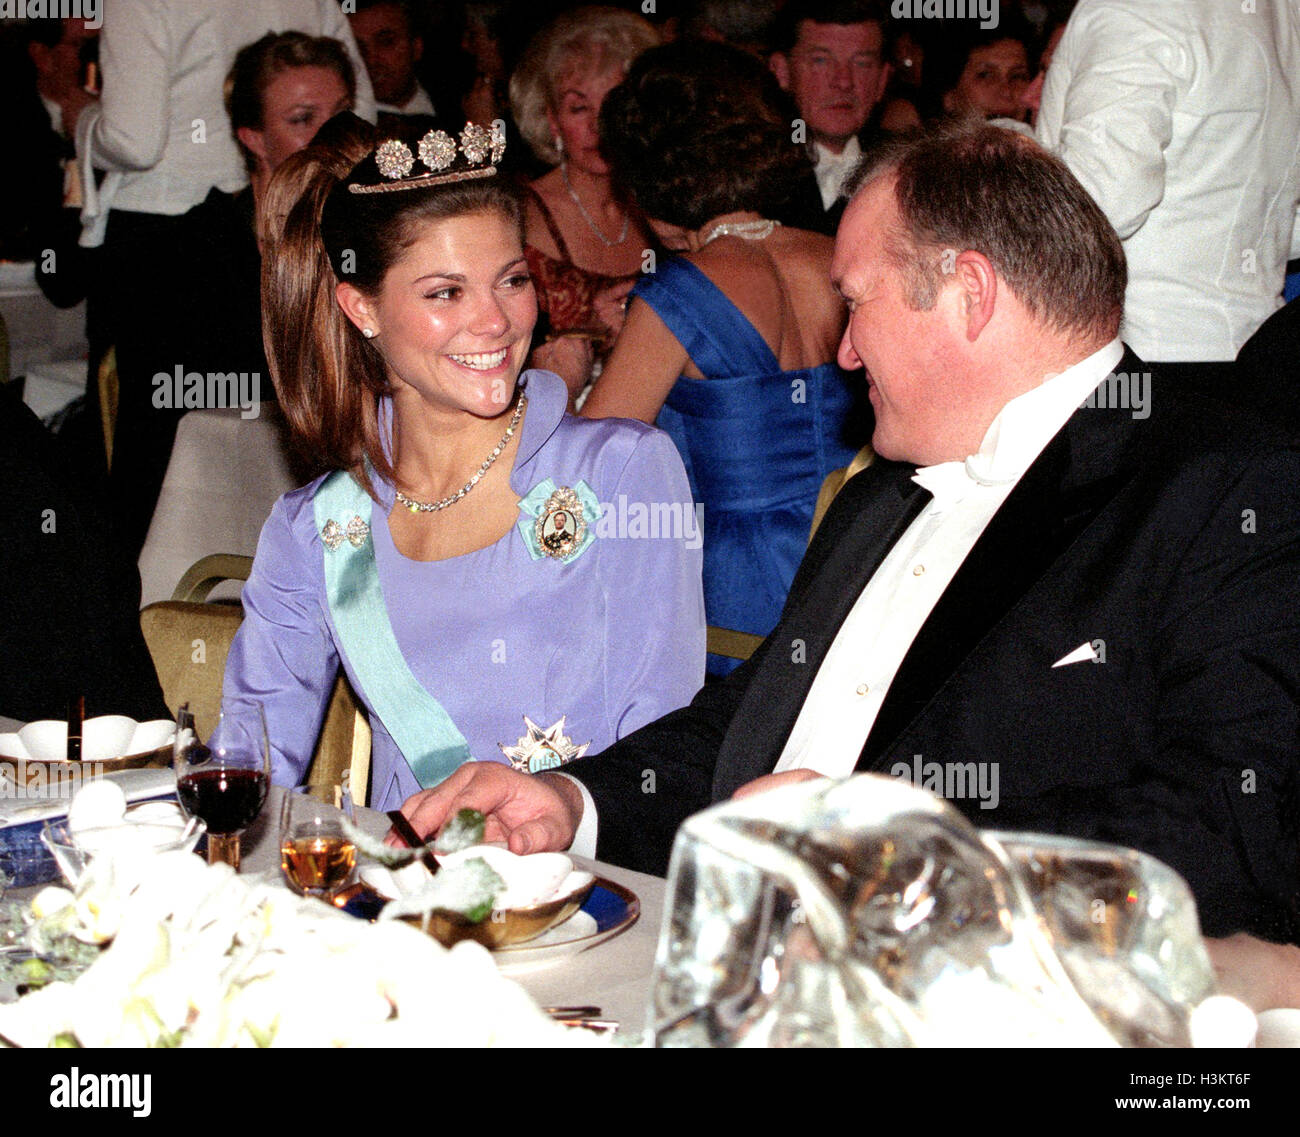 CROWN PRINCESS VICTORIA at the Nobel banquet with Swedish Prime minister Göran Persson 1997 Stock Photo